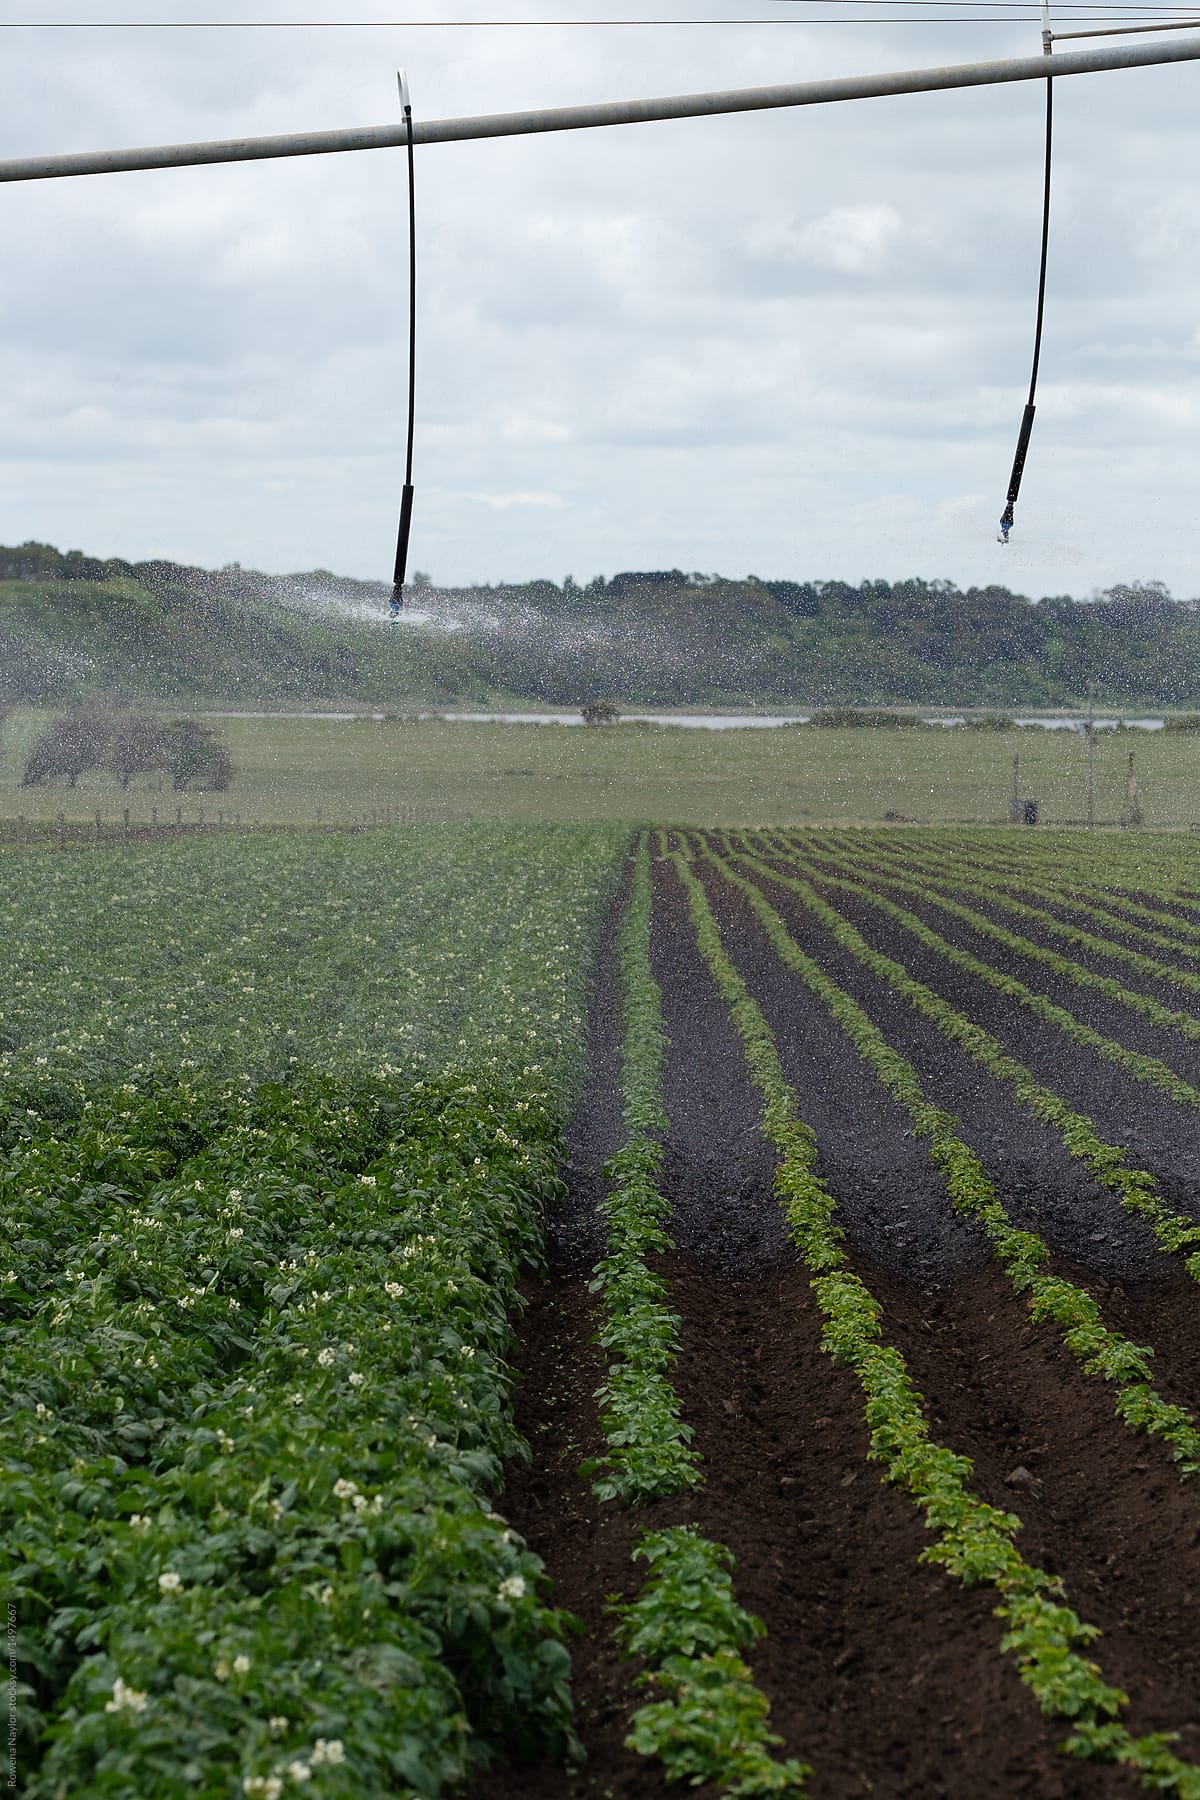 Potato crops at two growth stages sise by side, being watered by